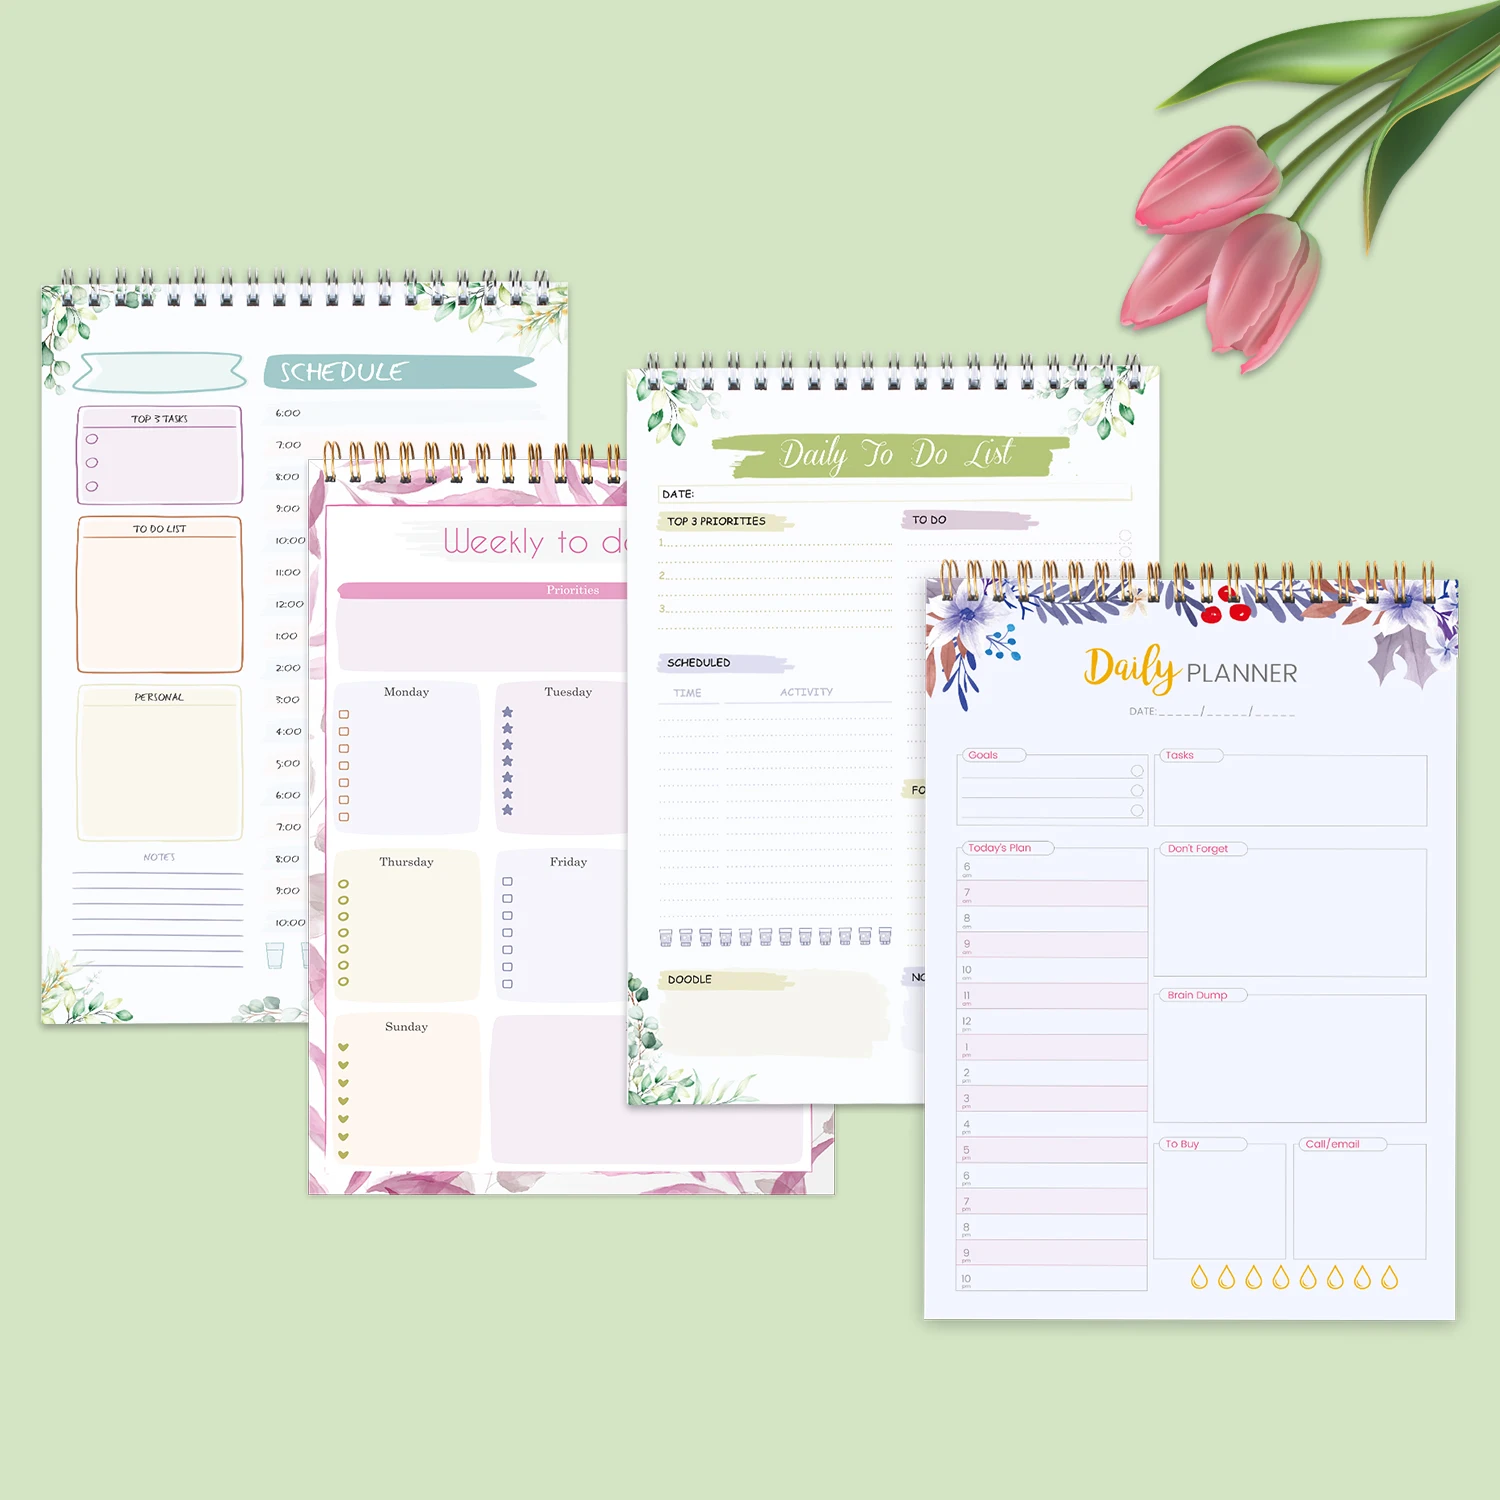 

Trees Aesthetic Daily Planner To Do List Notebook Organizer Spiral Agenda Diary Undated Weekly Plan Time Management Memo Journal